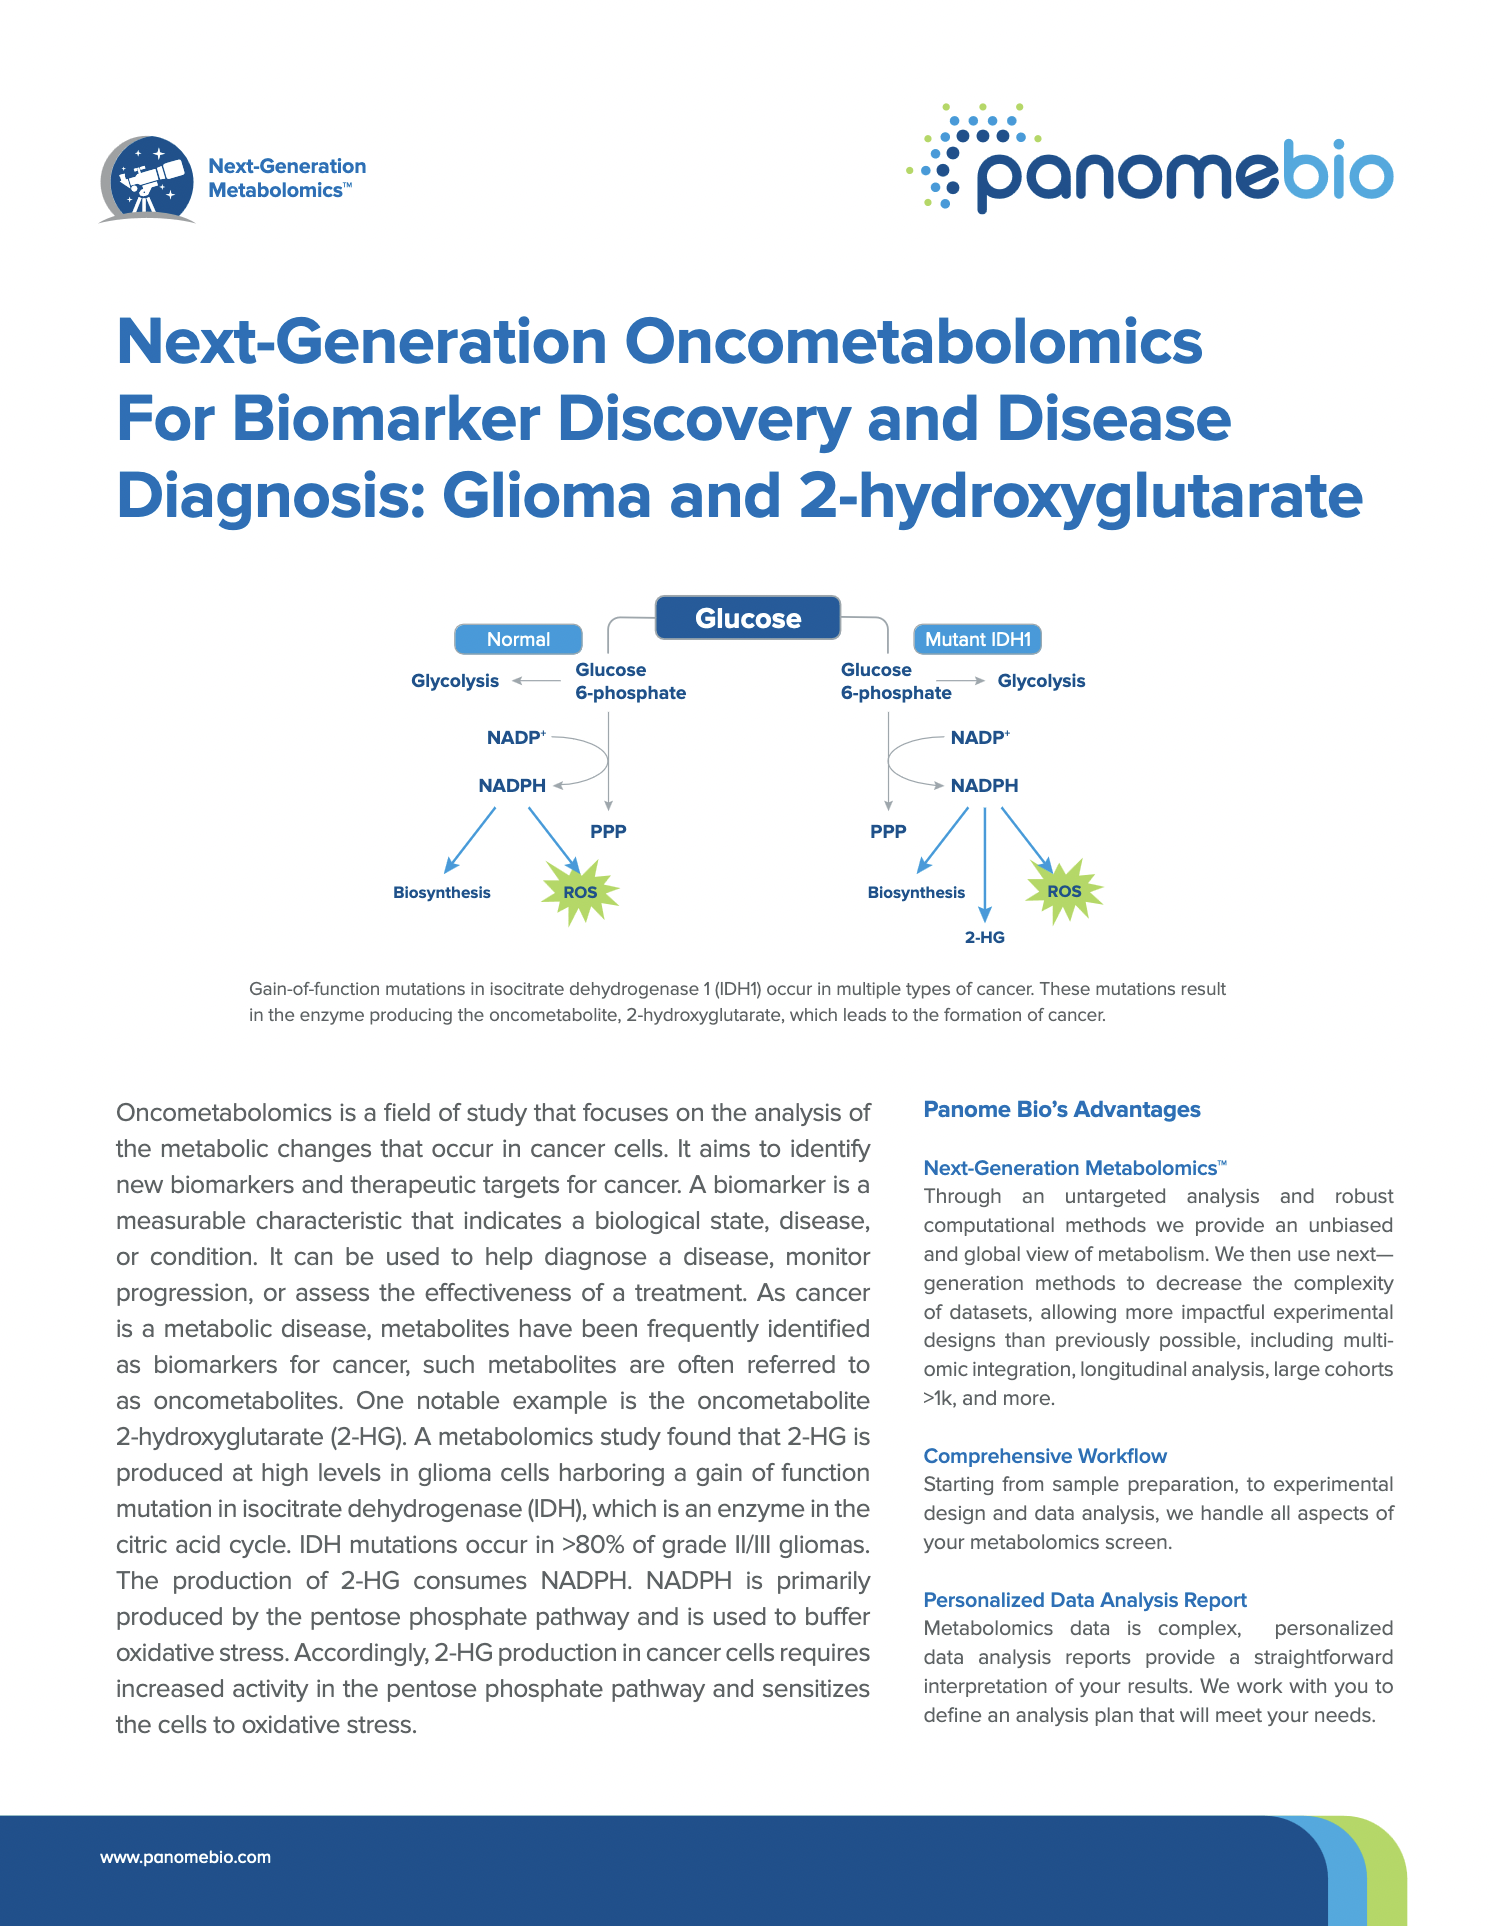 Biomarker Discovery and Disease Diagnosis: Oncometabolomics – Glioma and 2-HG